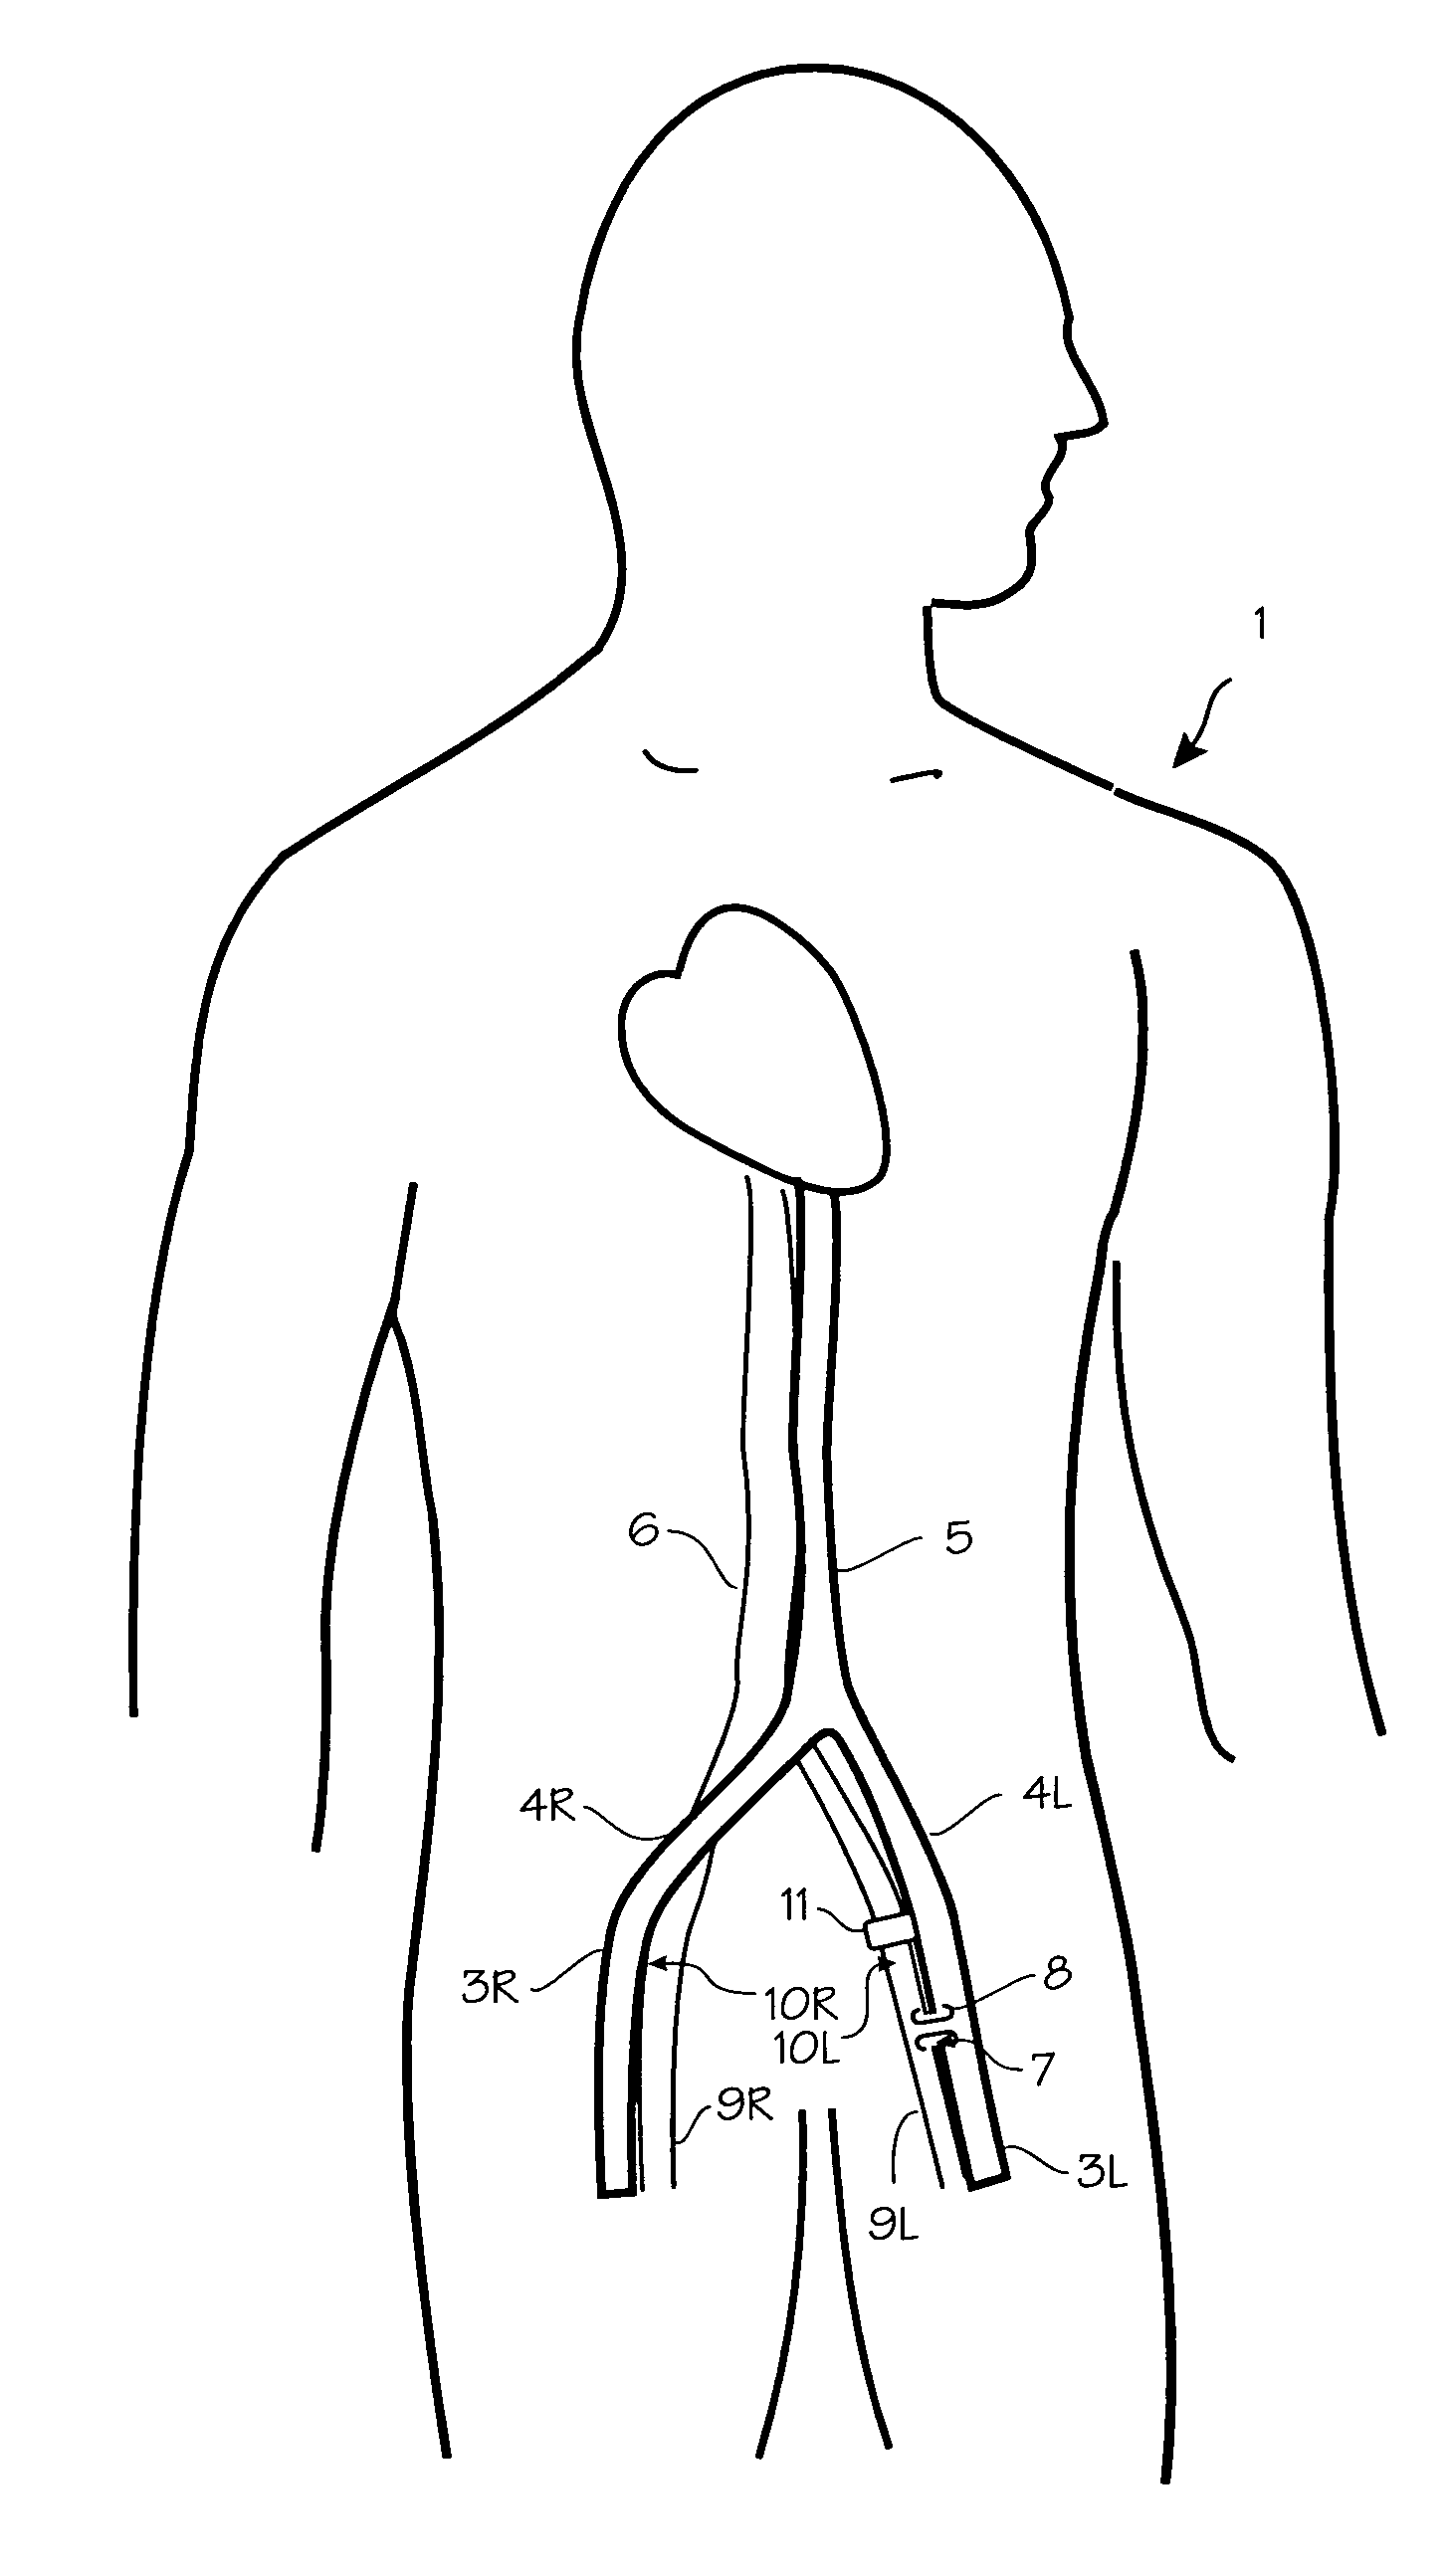 Method of treating COPD with artificial arterio-venous fistula and flow mediating systems